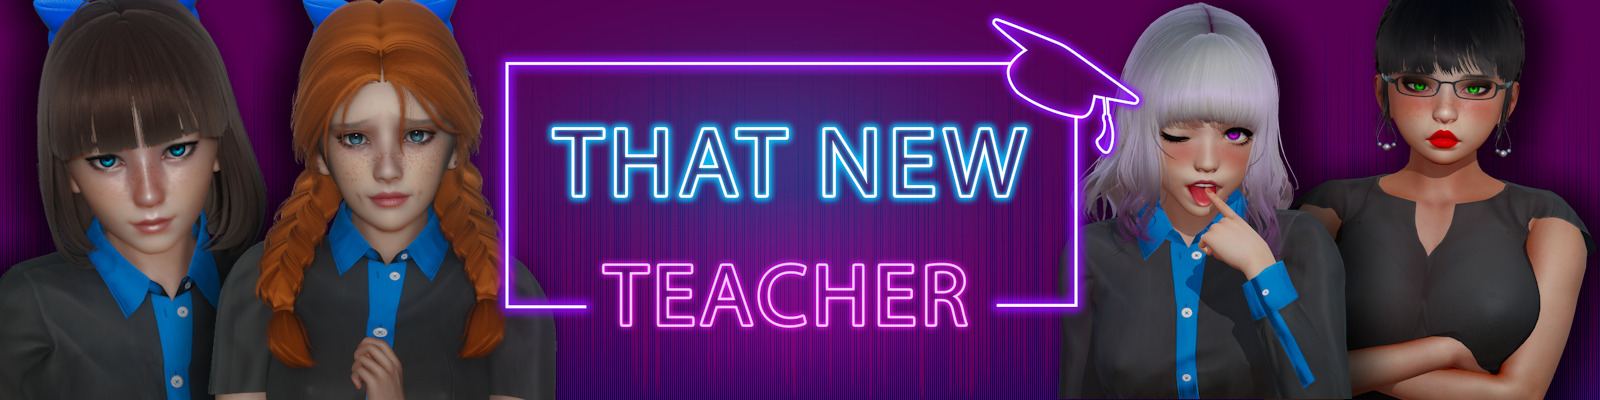 That New Teacher Free Download Latest Version RogueOne